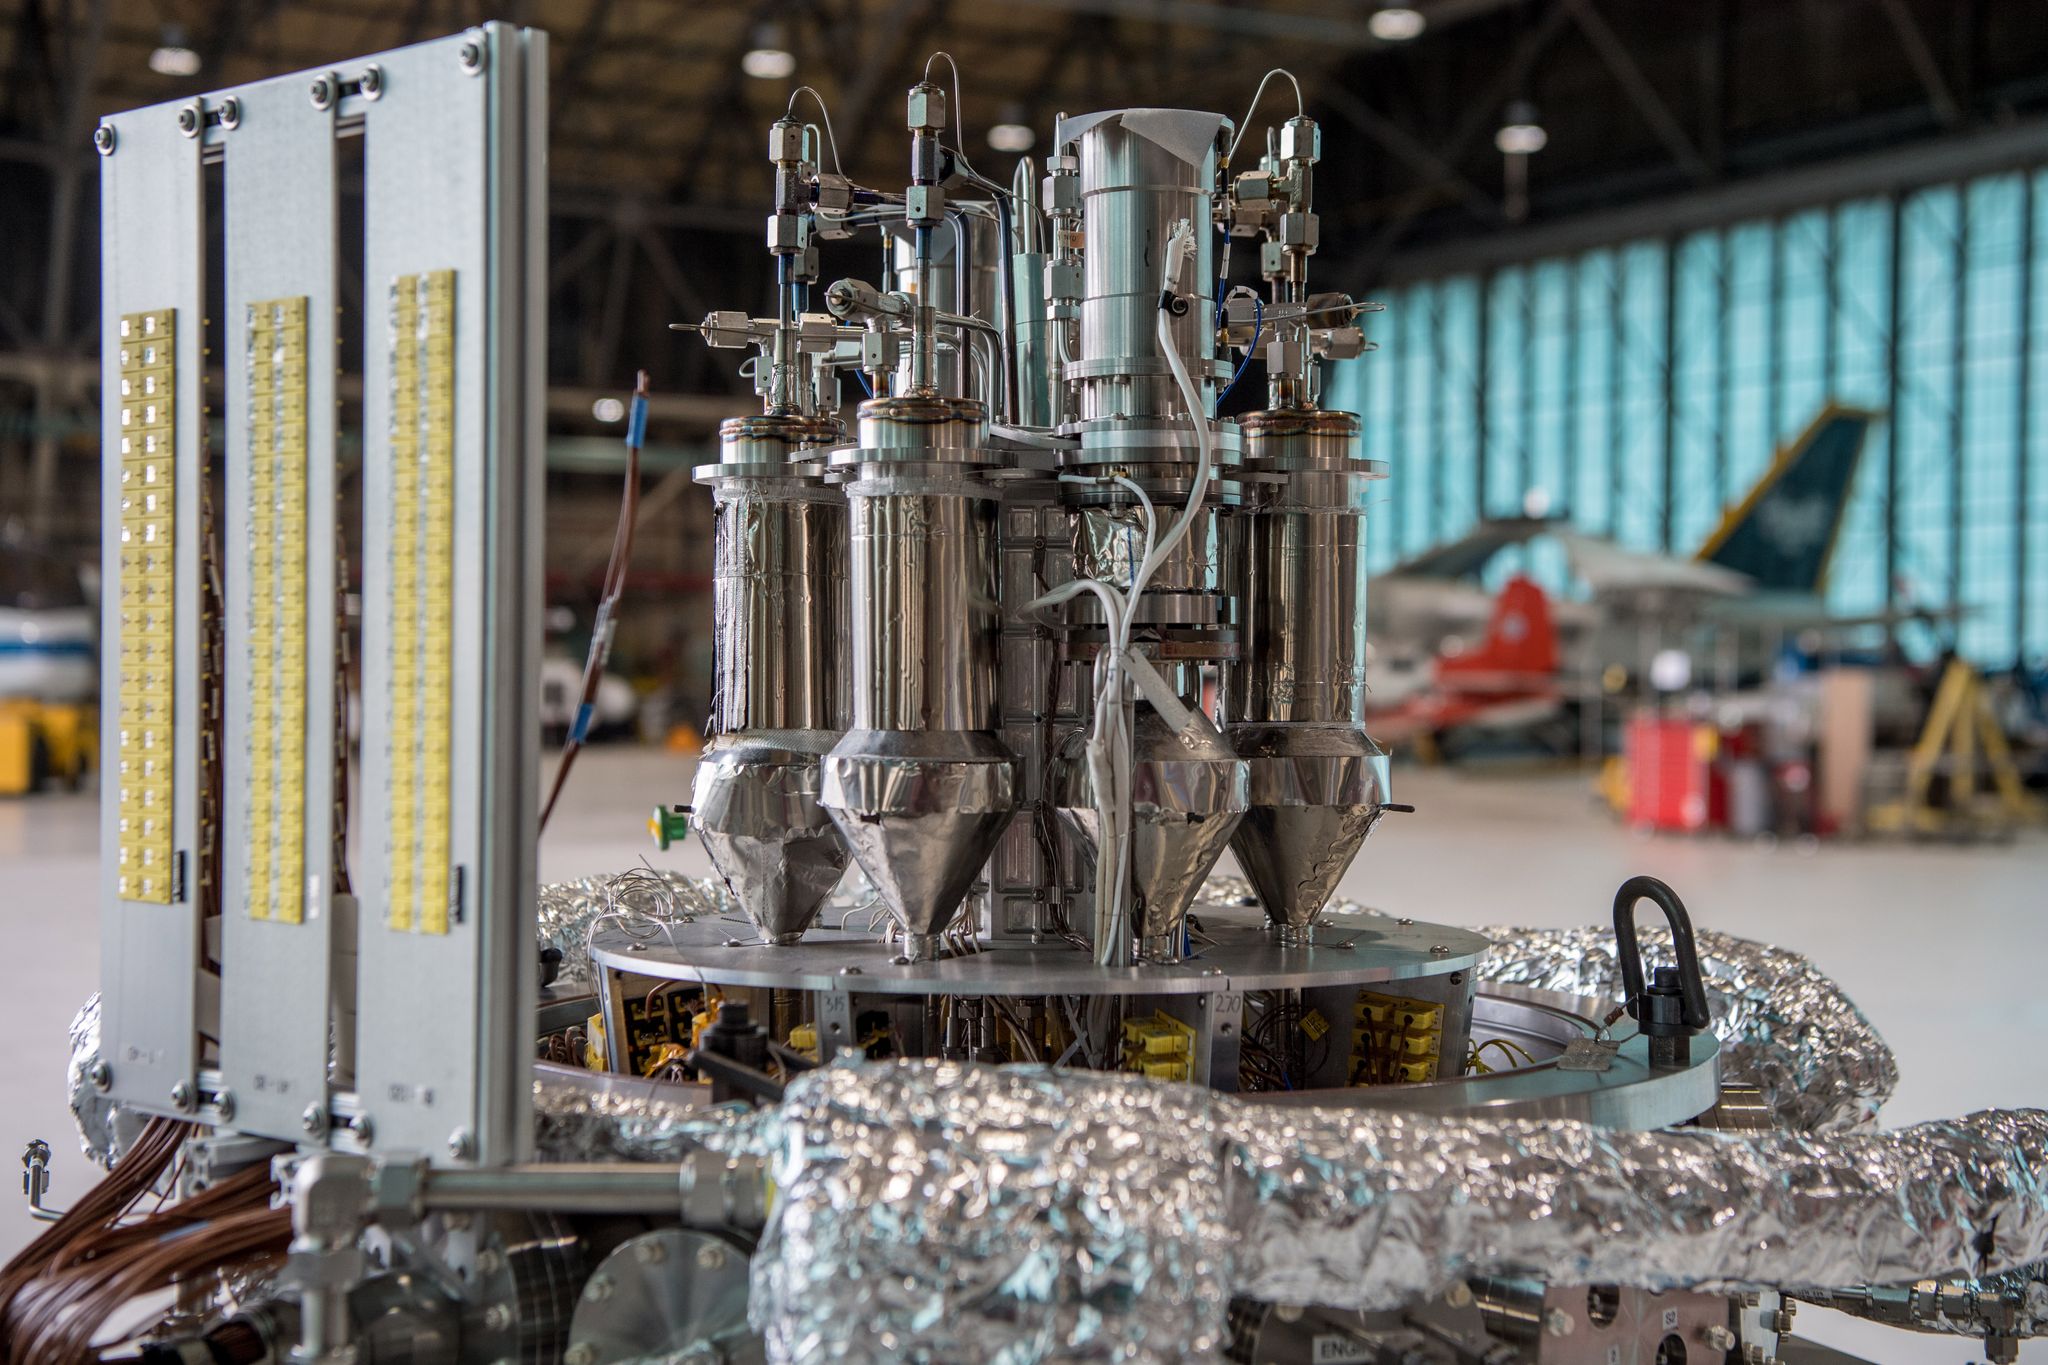 nasa's kilopower project pictured could help provide nuclear power for settlements on the moon